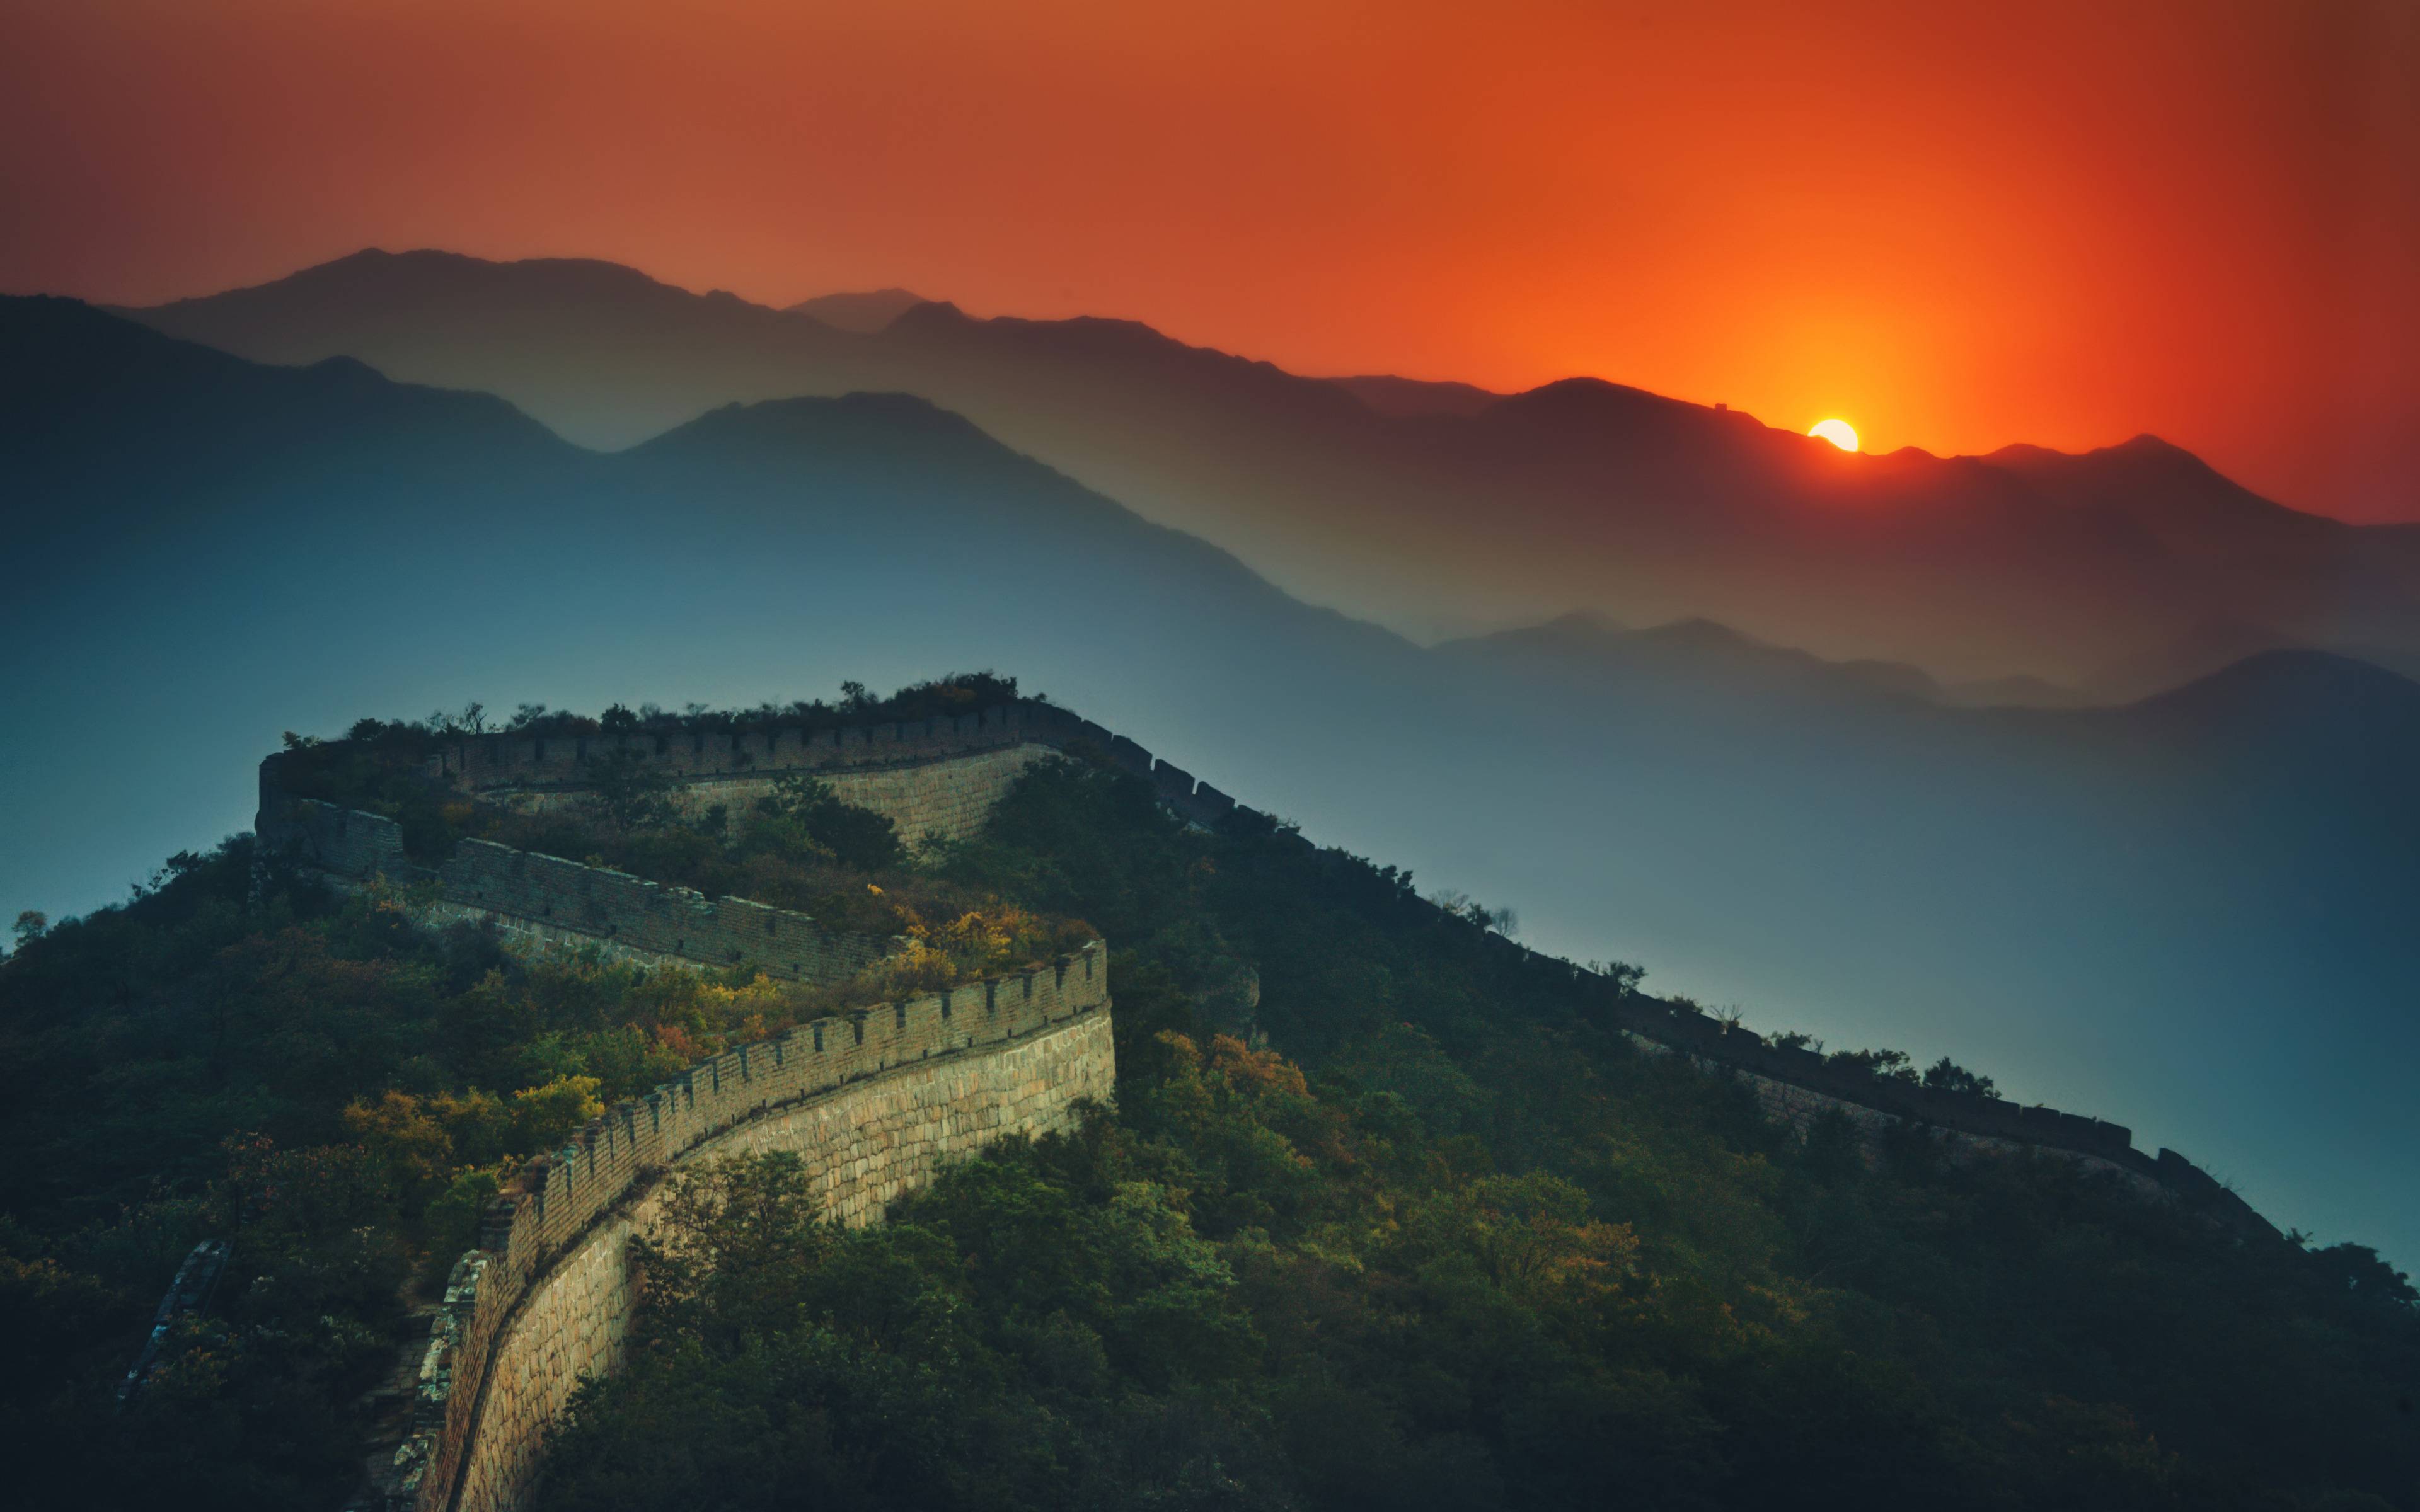 The Great Wall of China Stretches Across the Sunset widescreen